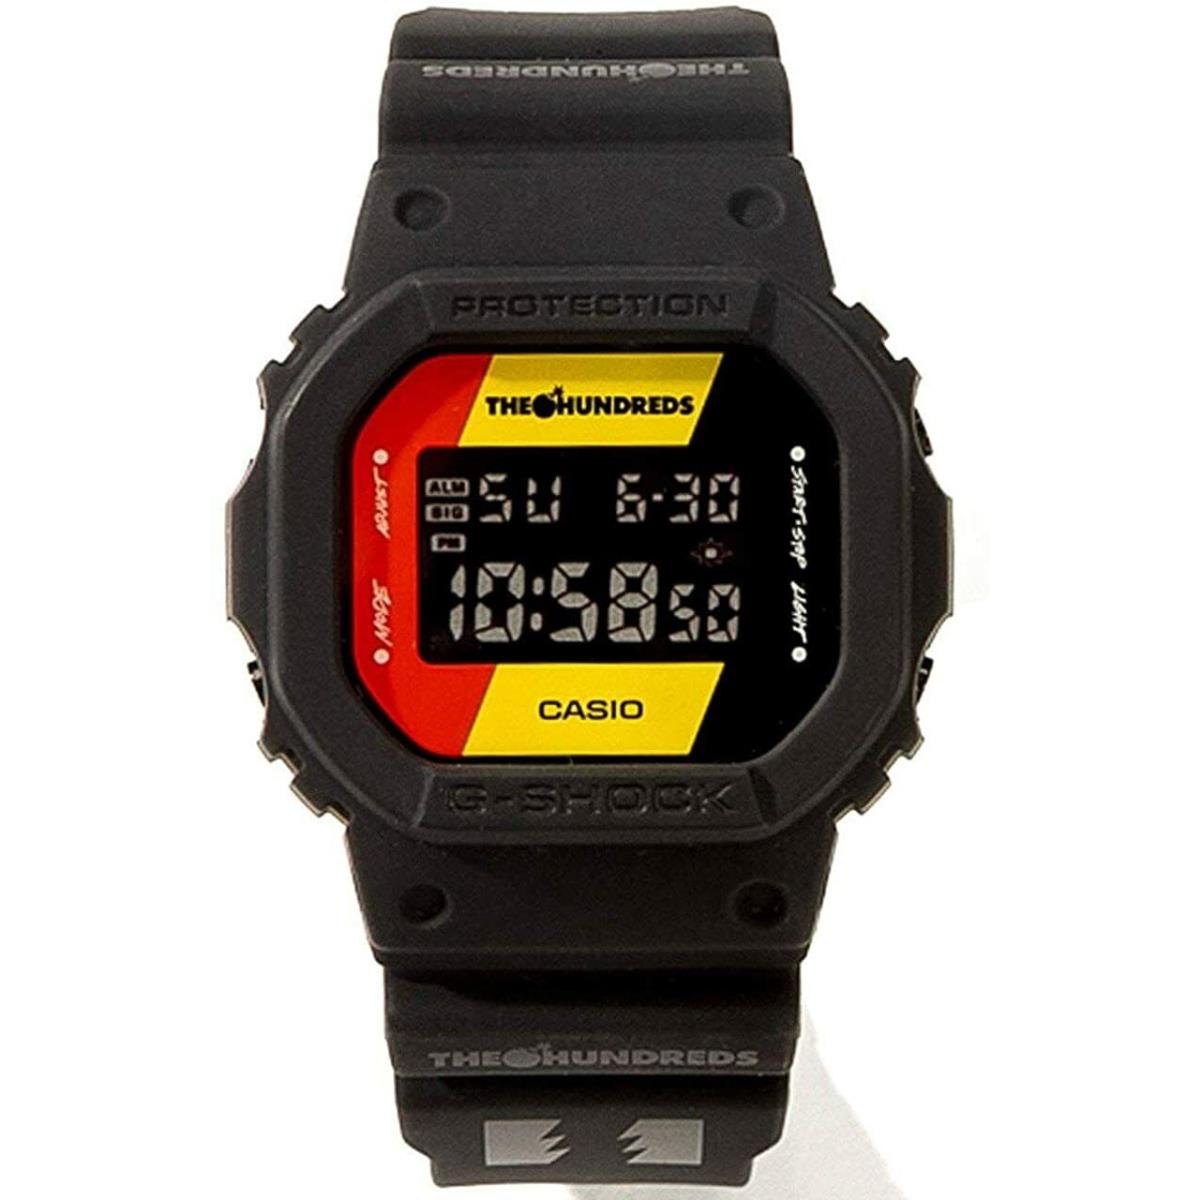 G-shock DW5600HDR-1 The Hundreds Limited Edition Black Watch